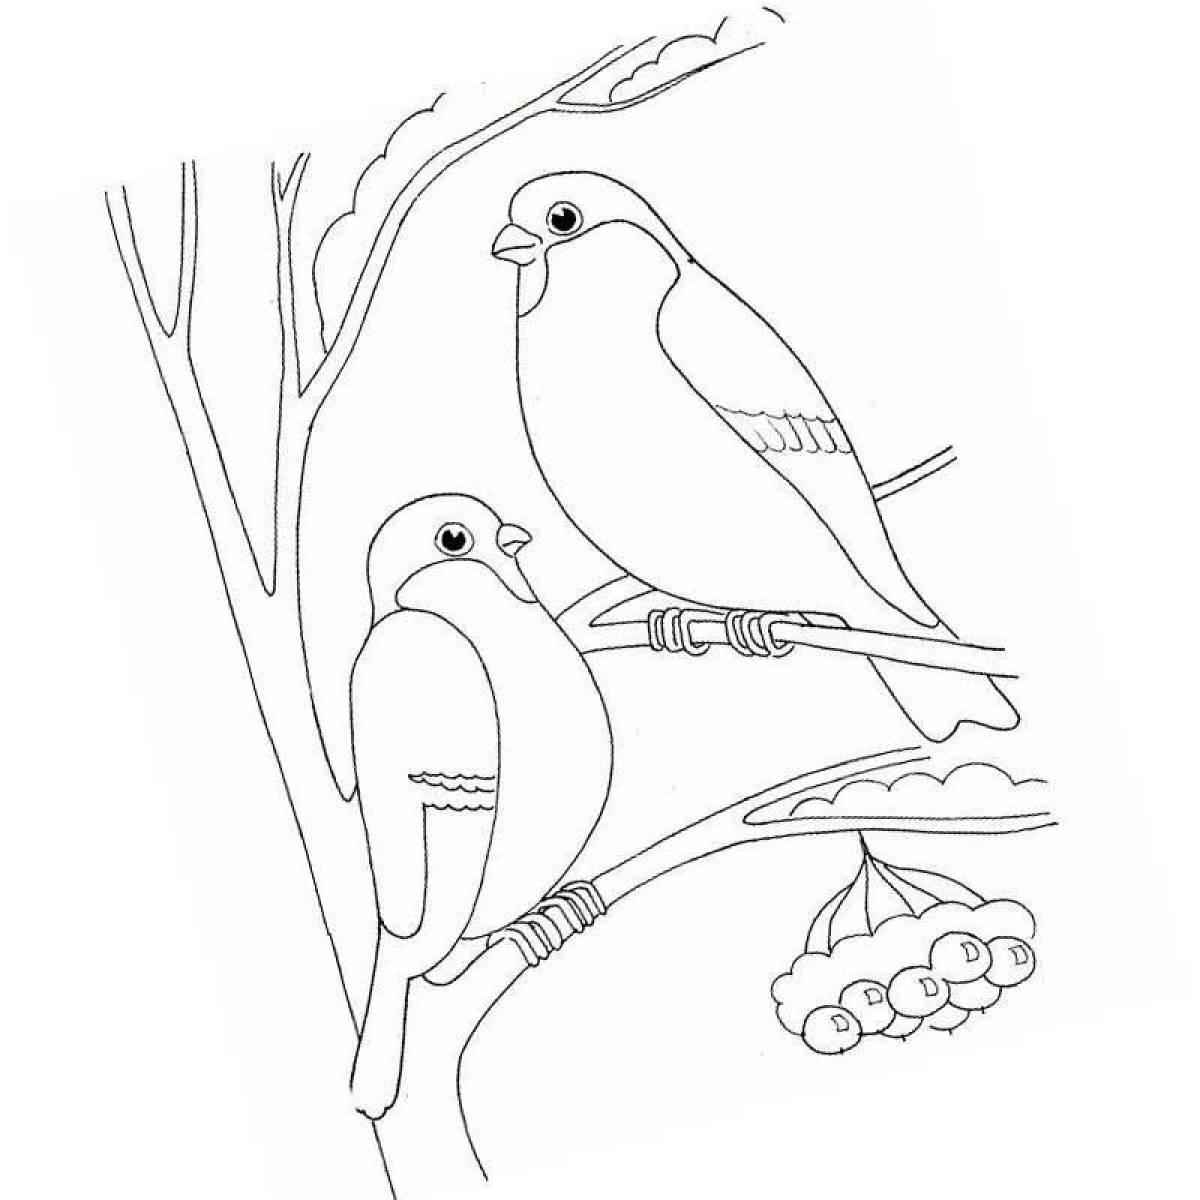 Fabulous coloring pages of wintering birds for 3-4 year olds